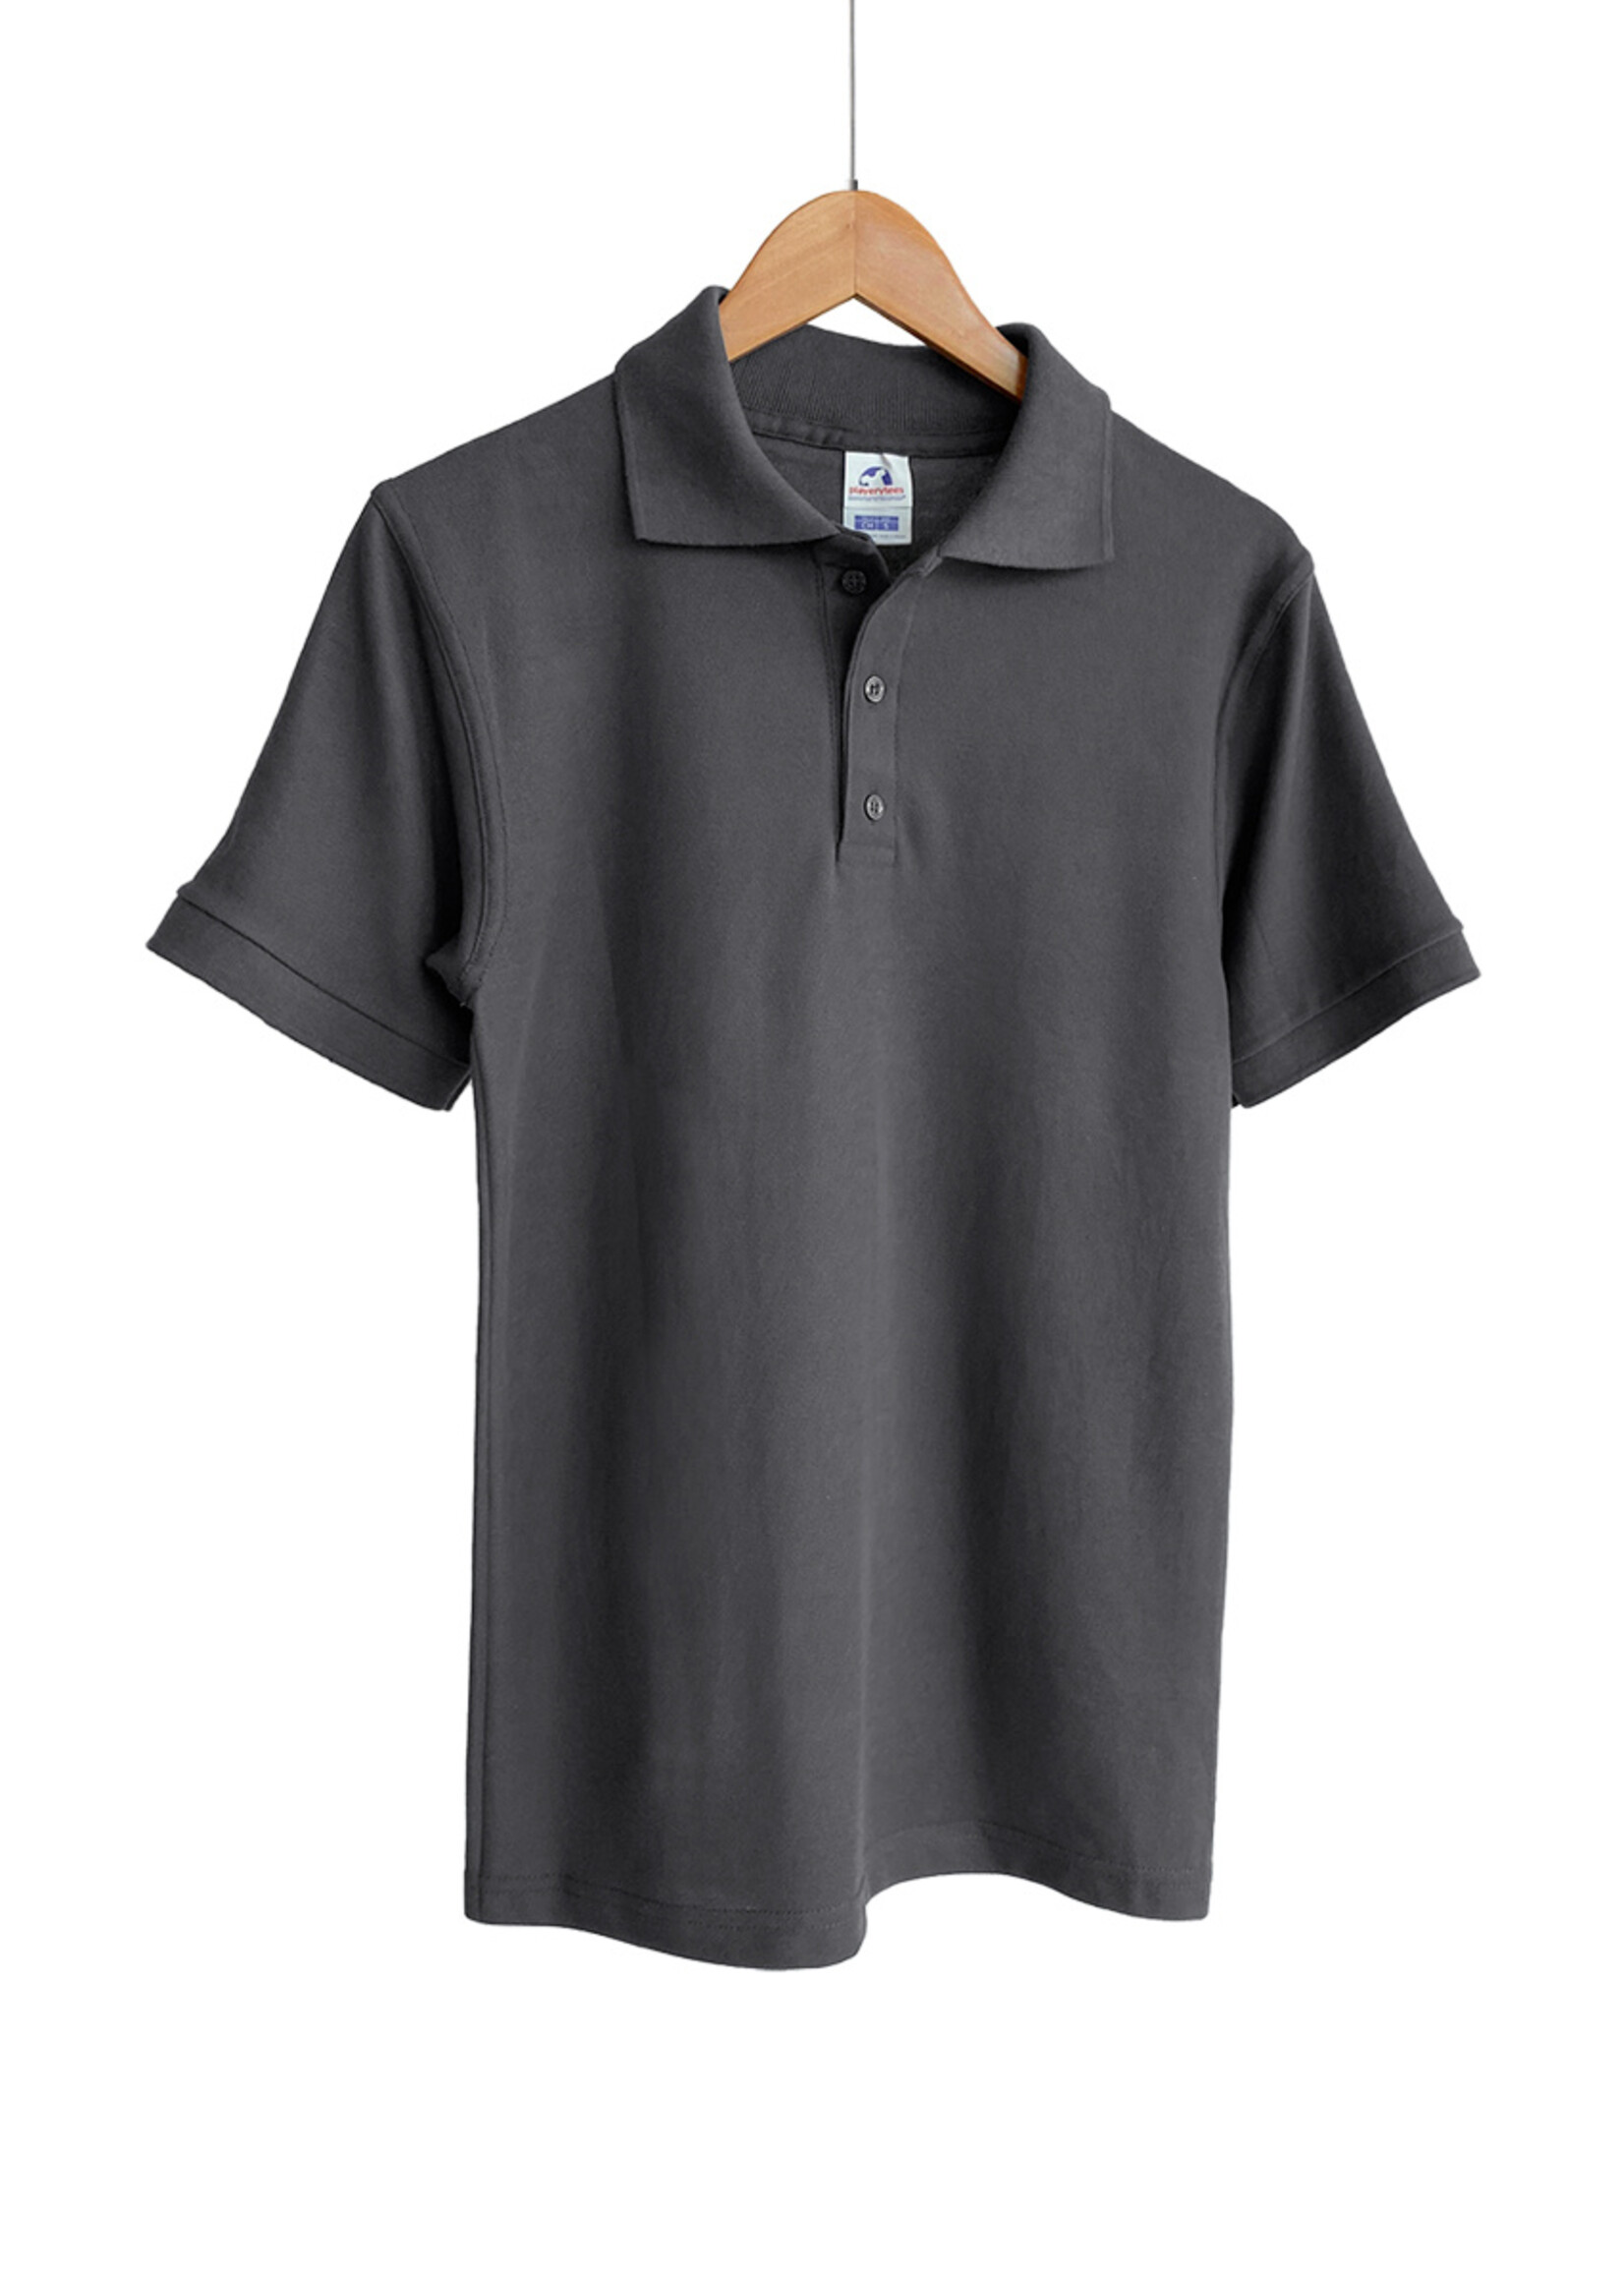 Playerytees STYLE 600C - CARDED POLO 50% COTTON 50% POLYESTER